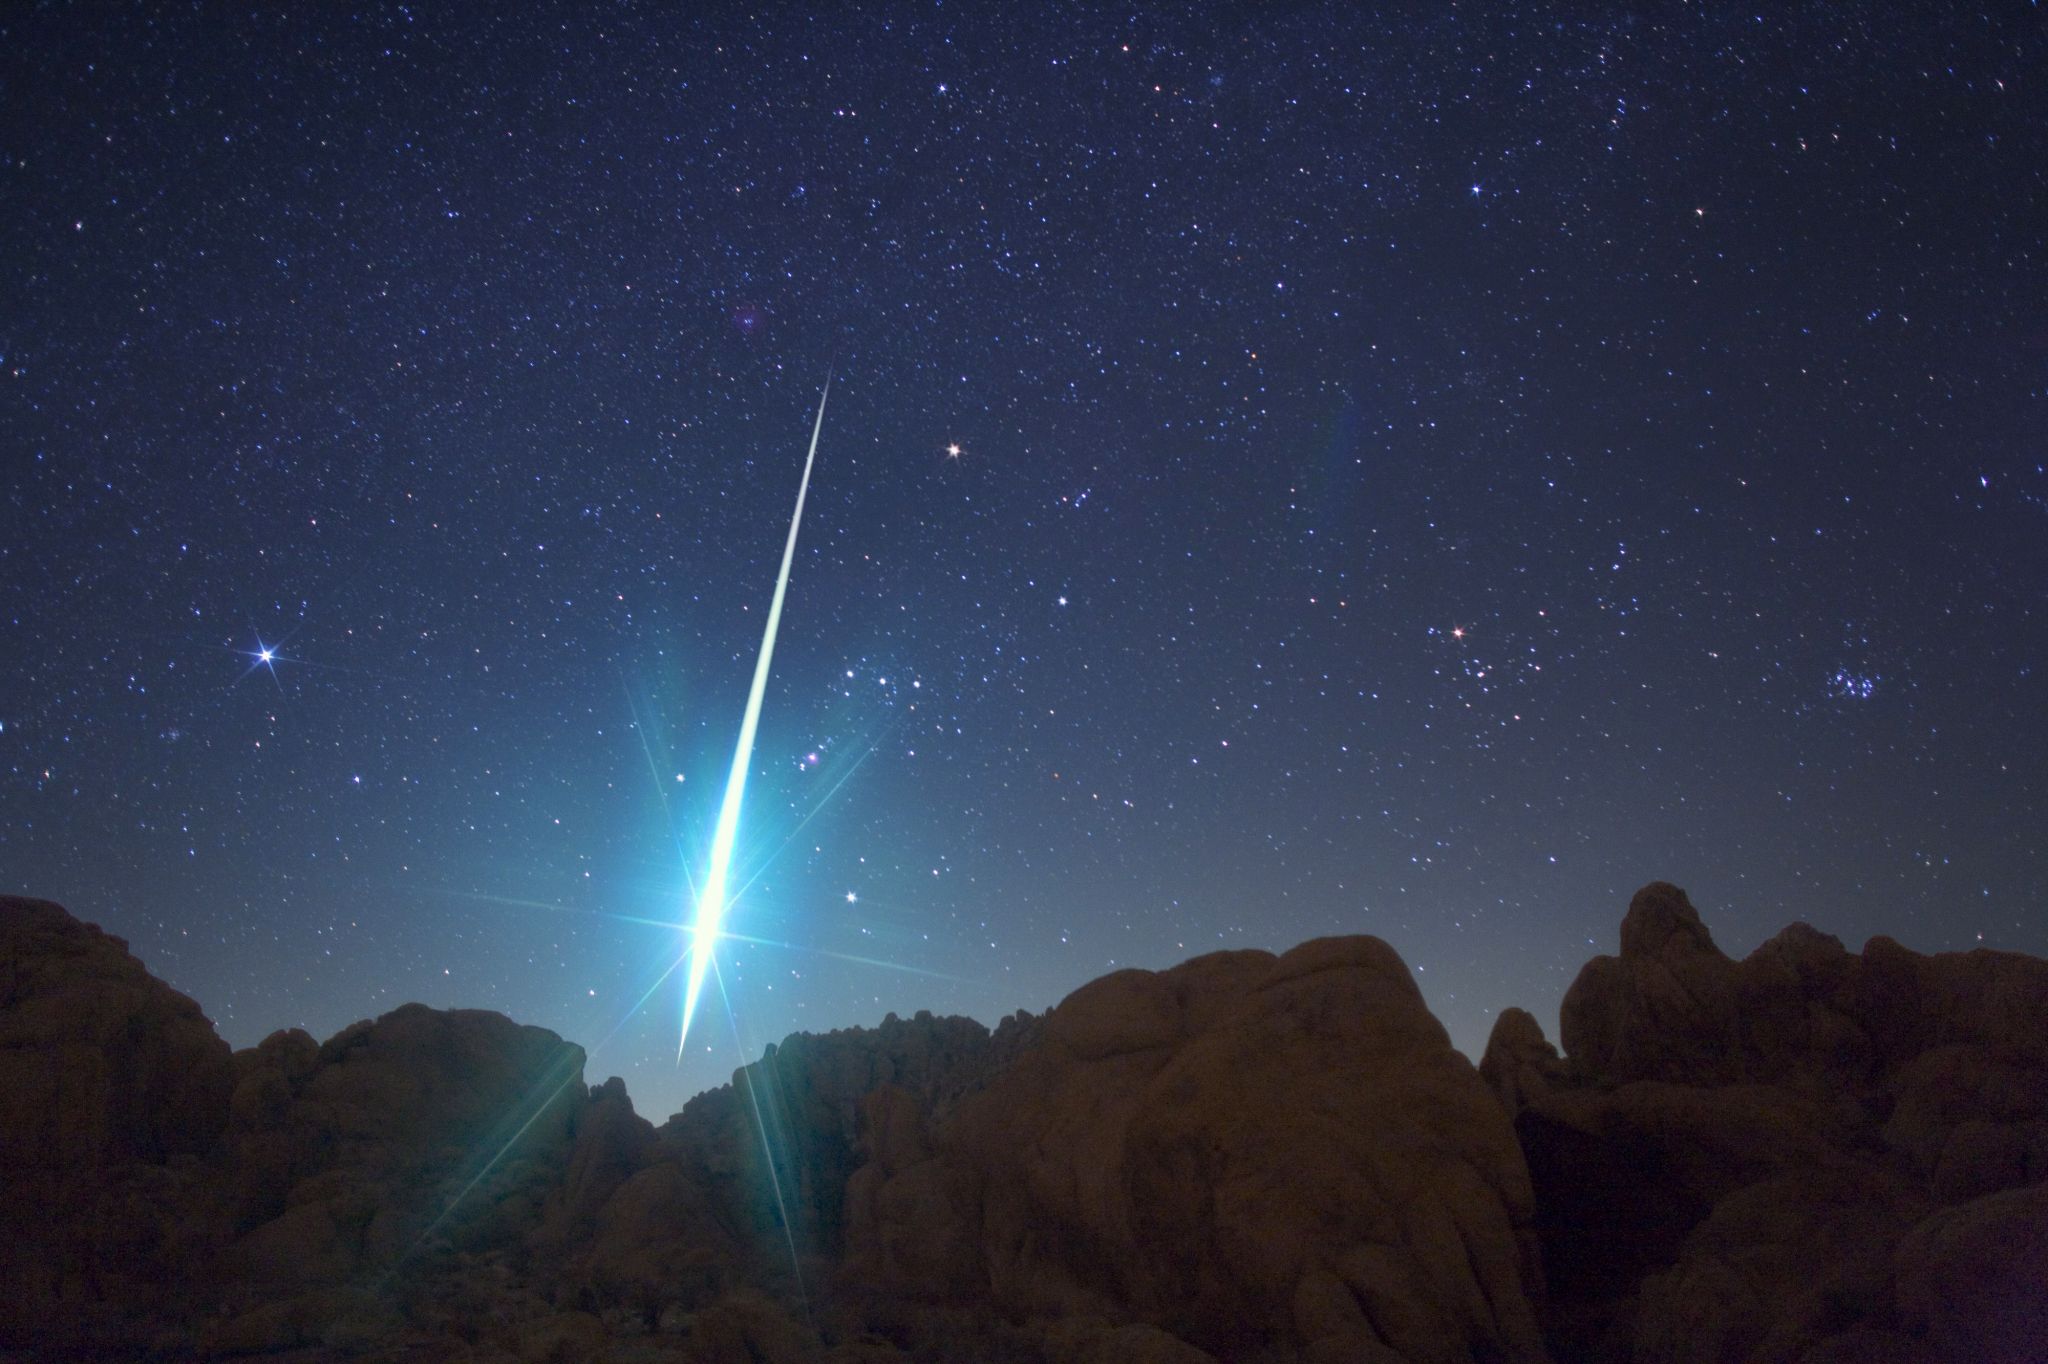 When to catch the Geminid meteor shower in the San Francisco Bay Area